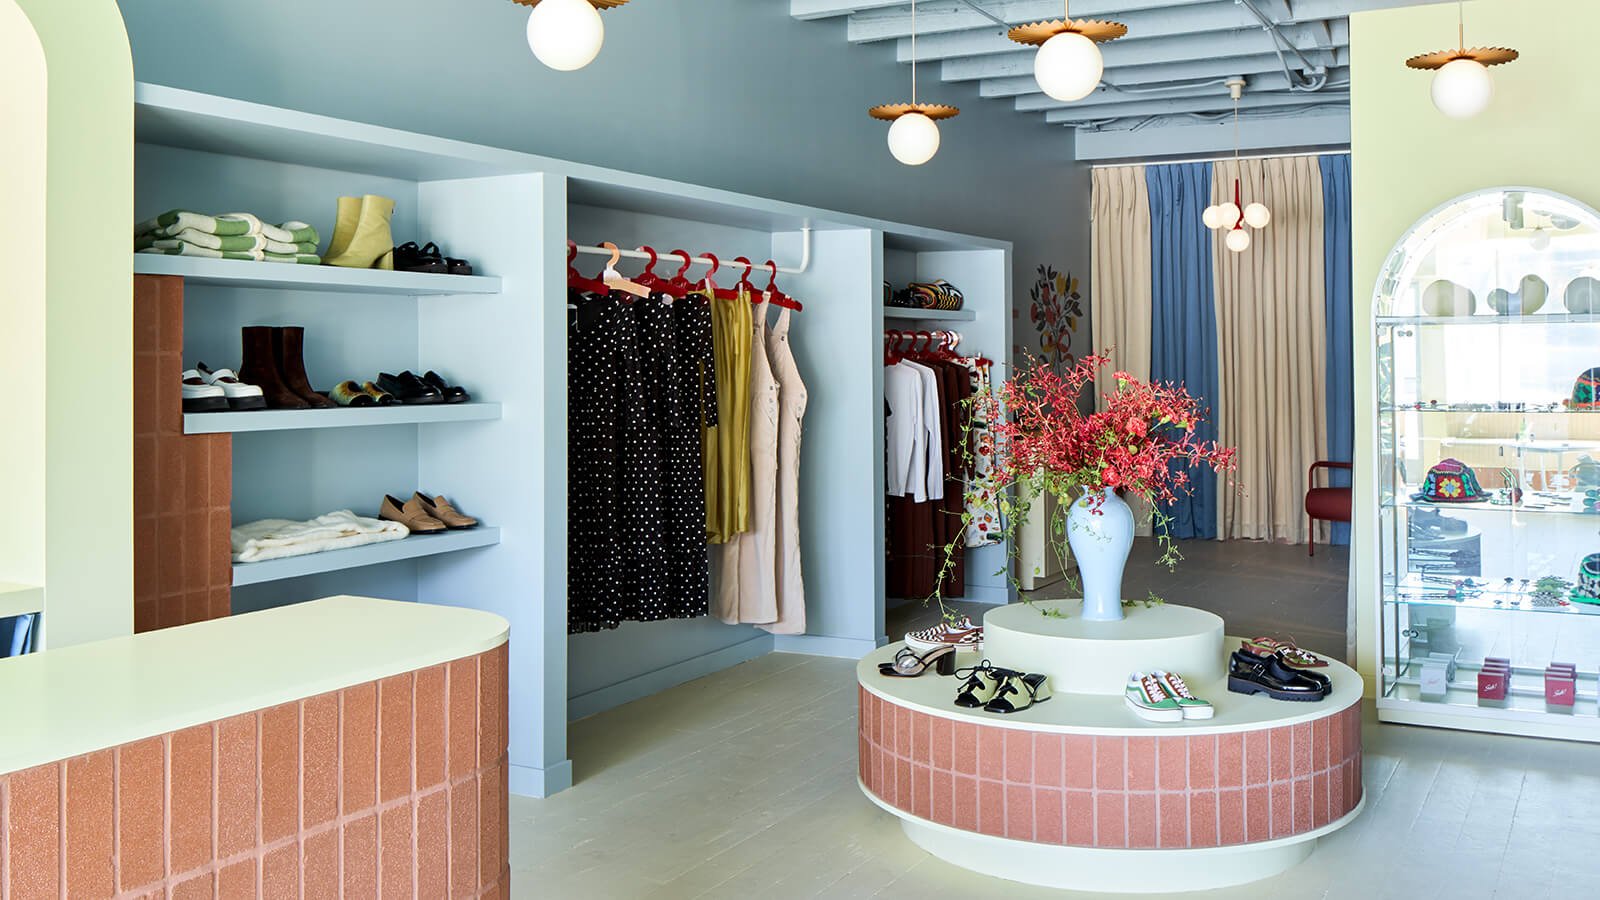 An L.A. Clothing Boutique Makes a Bold Statement: Sing-Sing Studio brings a fashion brand’s eclectic style to Sunset Boulevard (Azure)